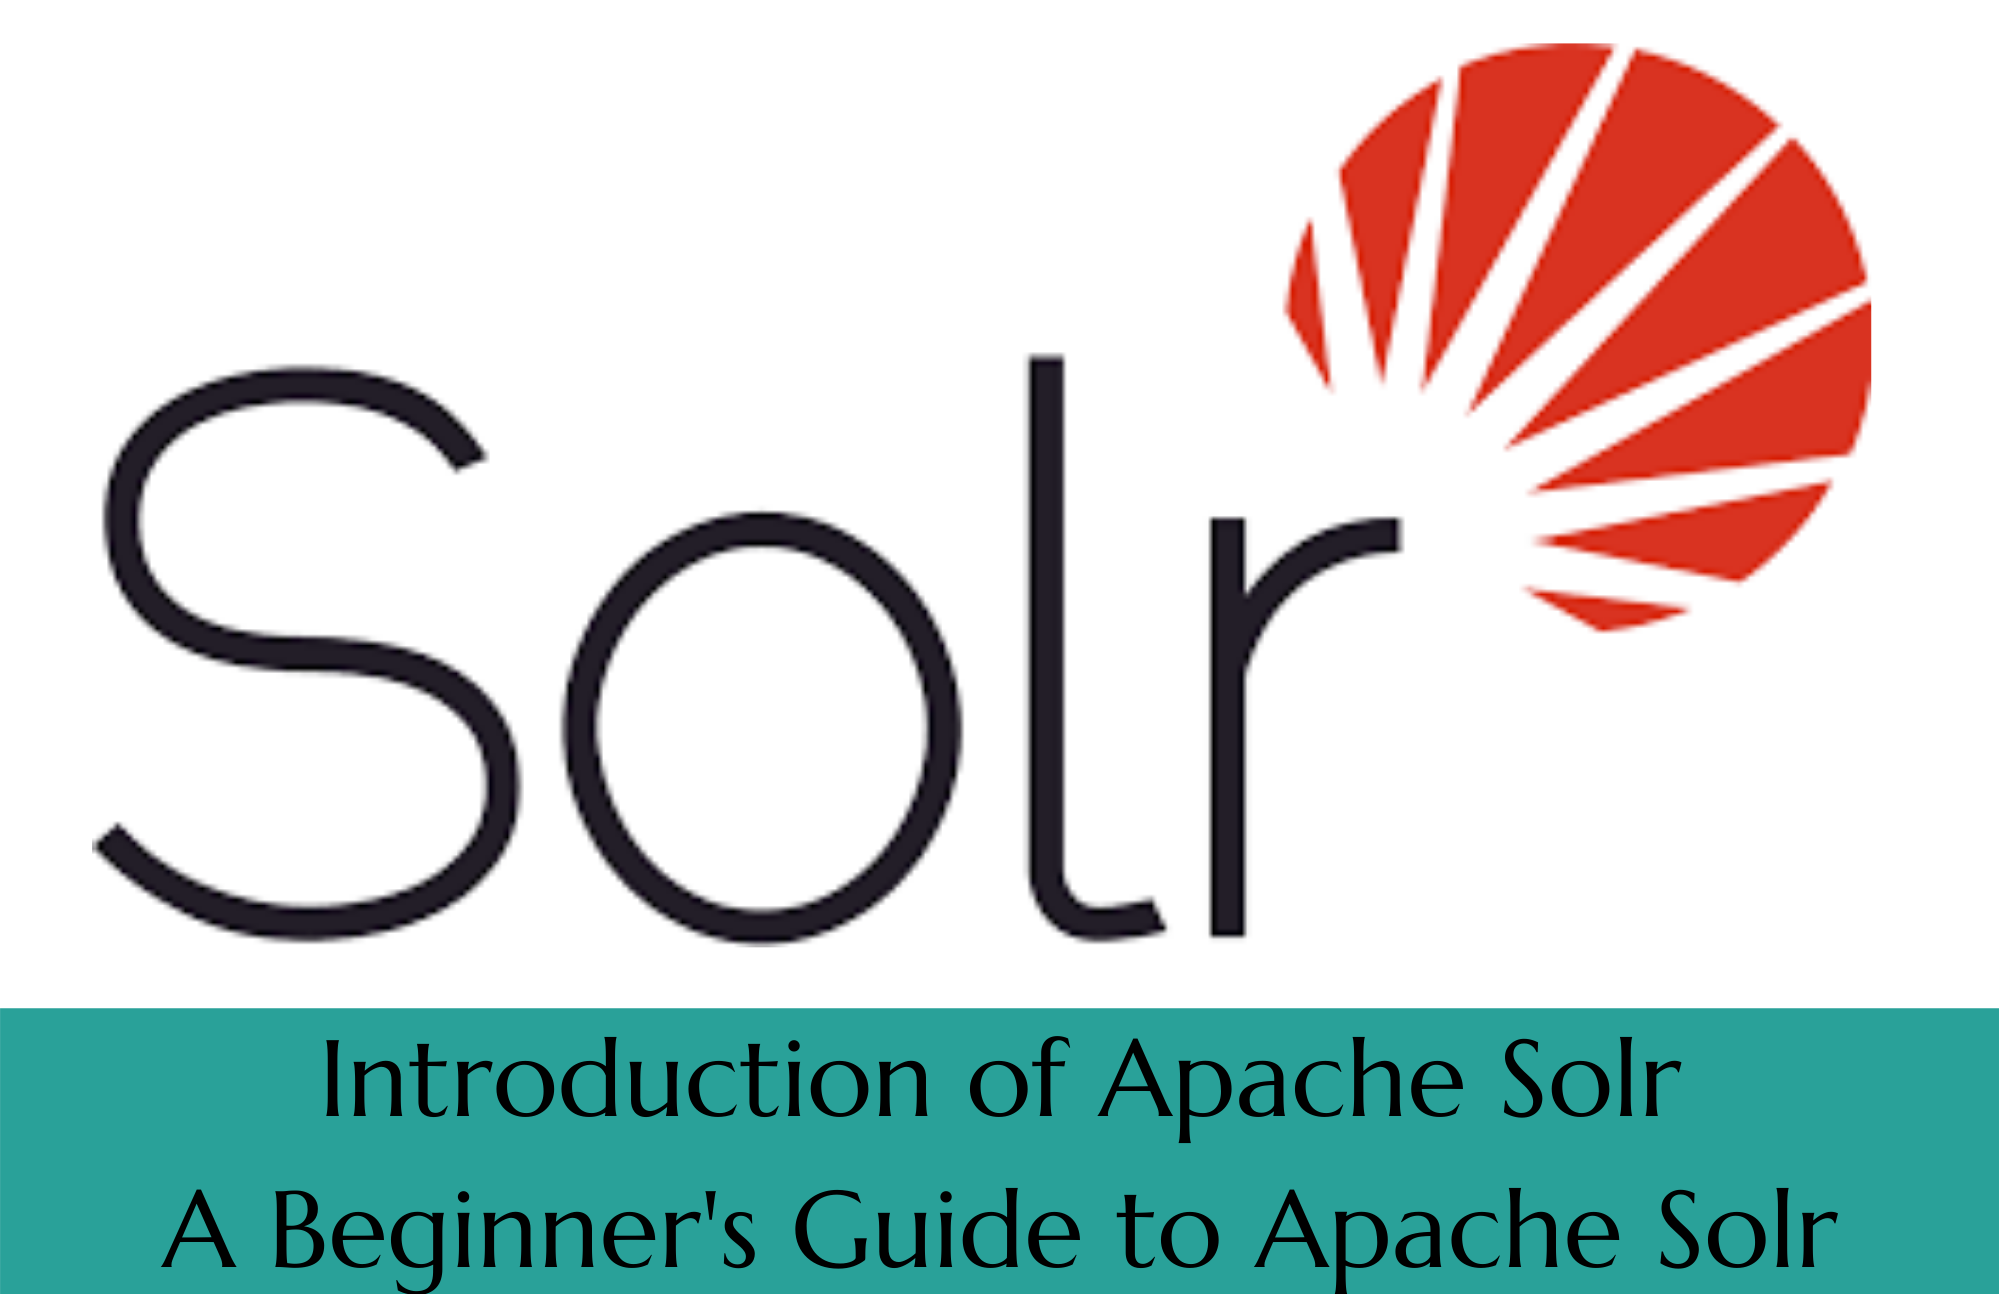 Introduction of Apache Solr, A Beginner’s Guide to Apache Solr